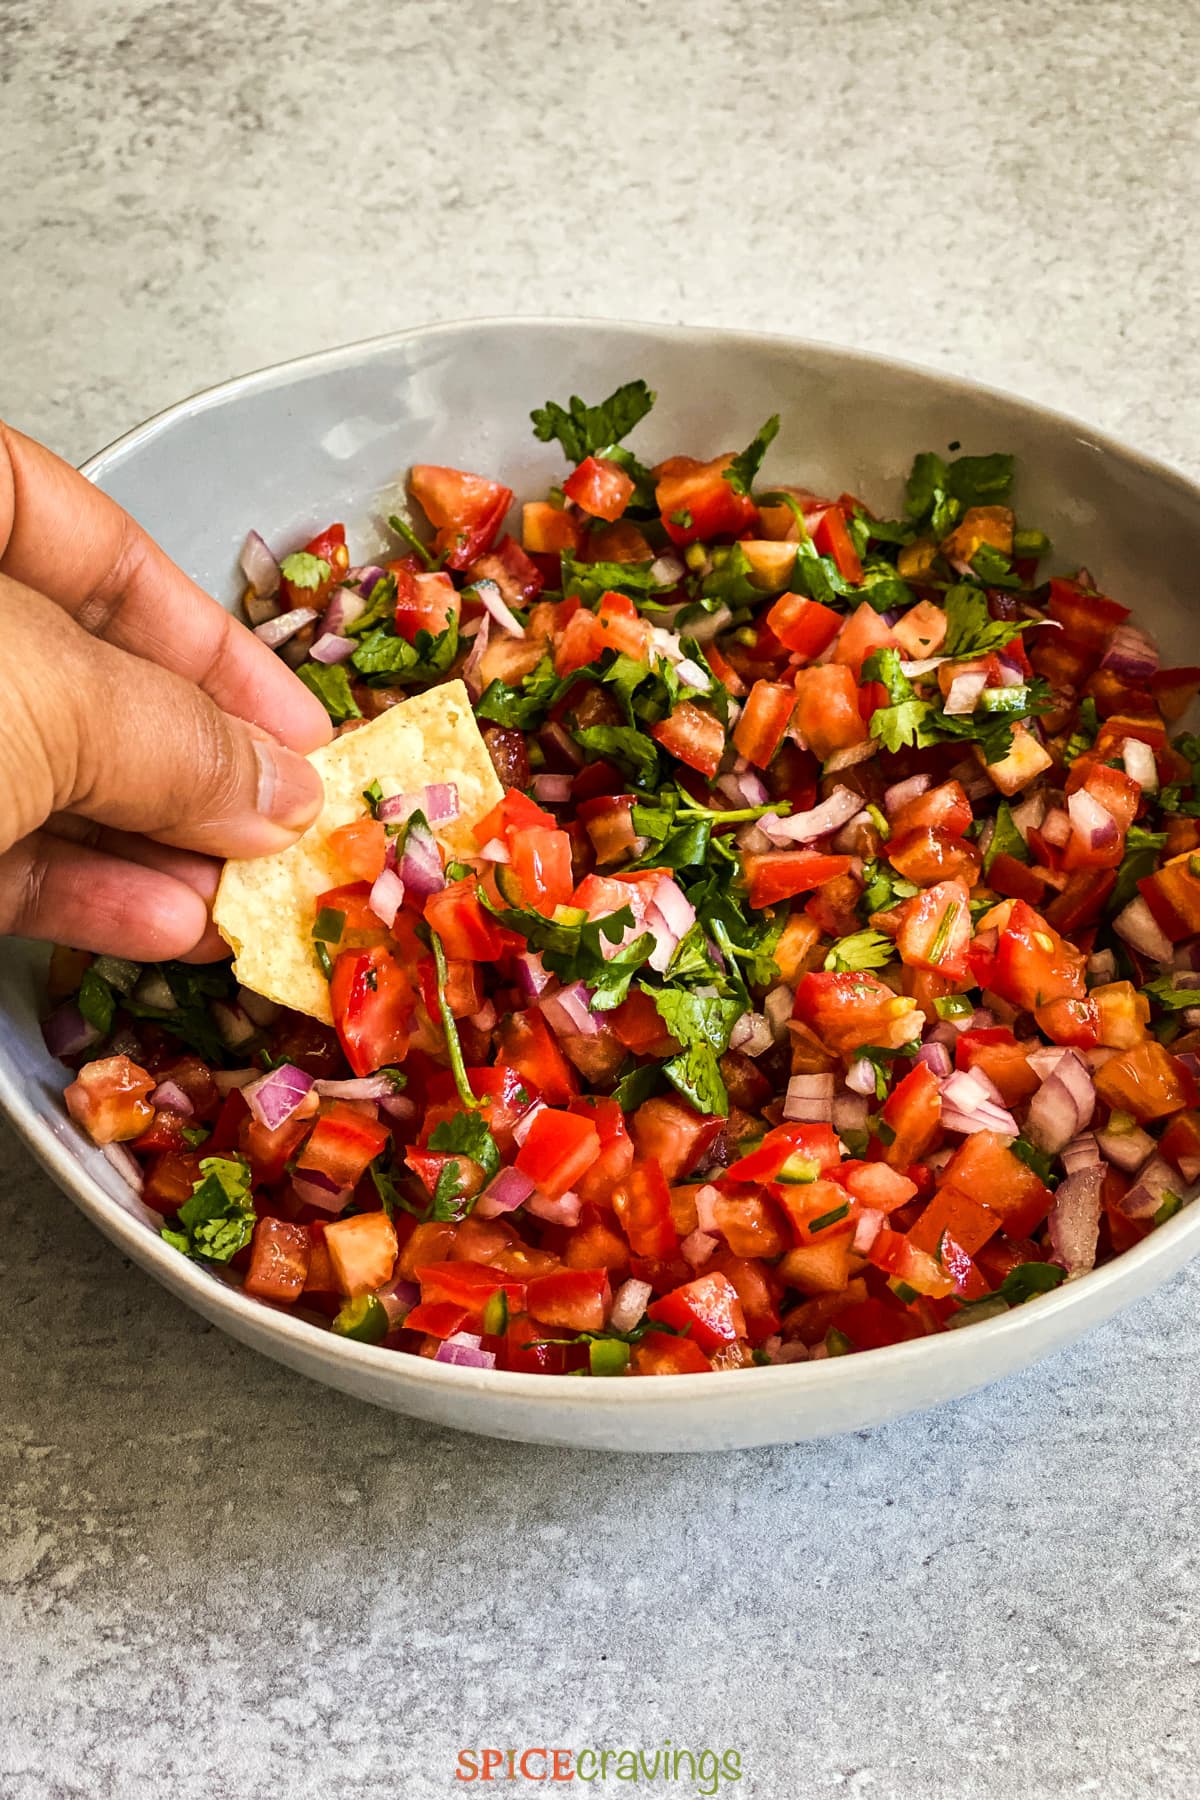 Hand dipping chips in pico de gallo